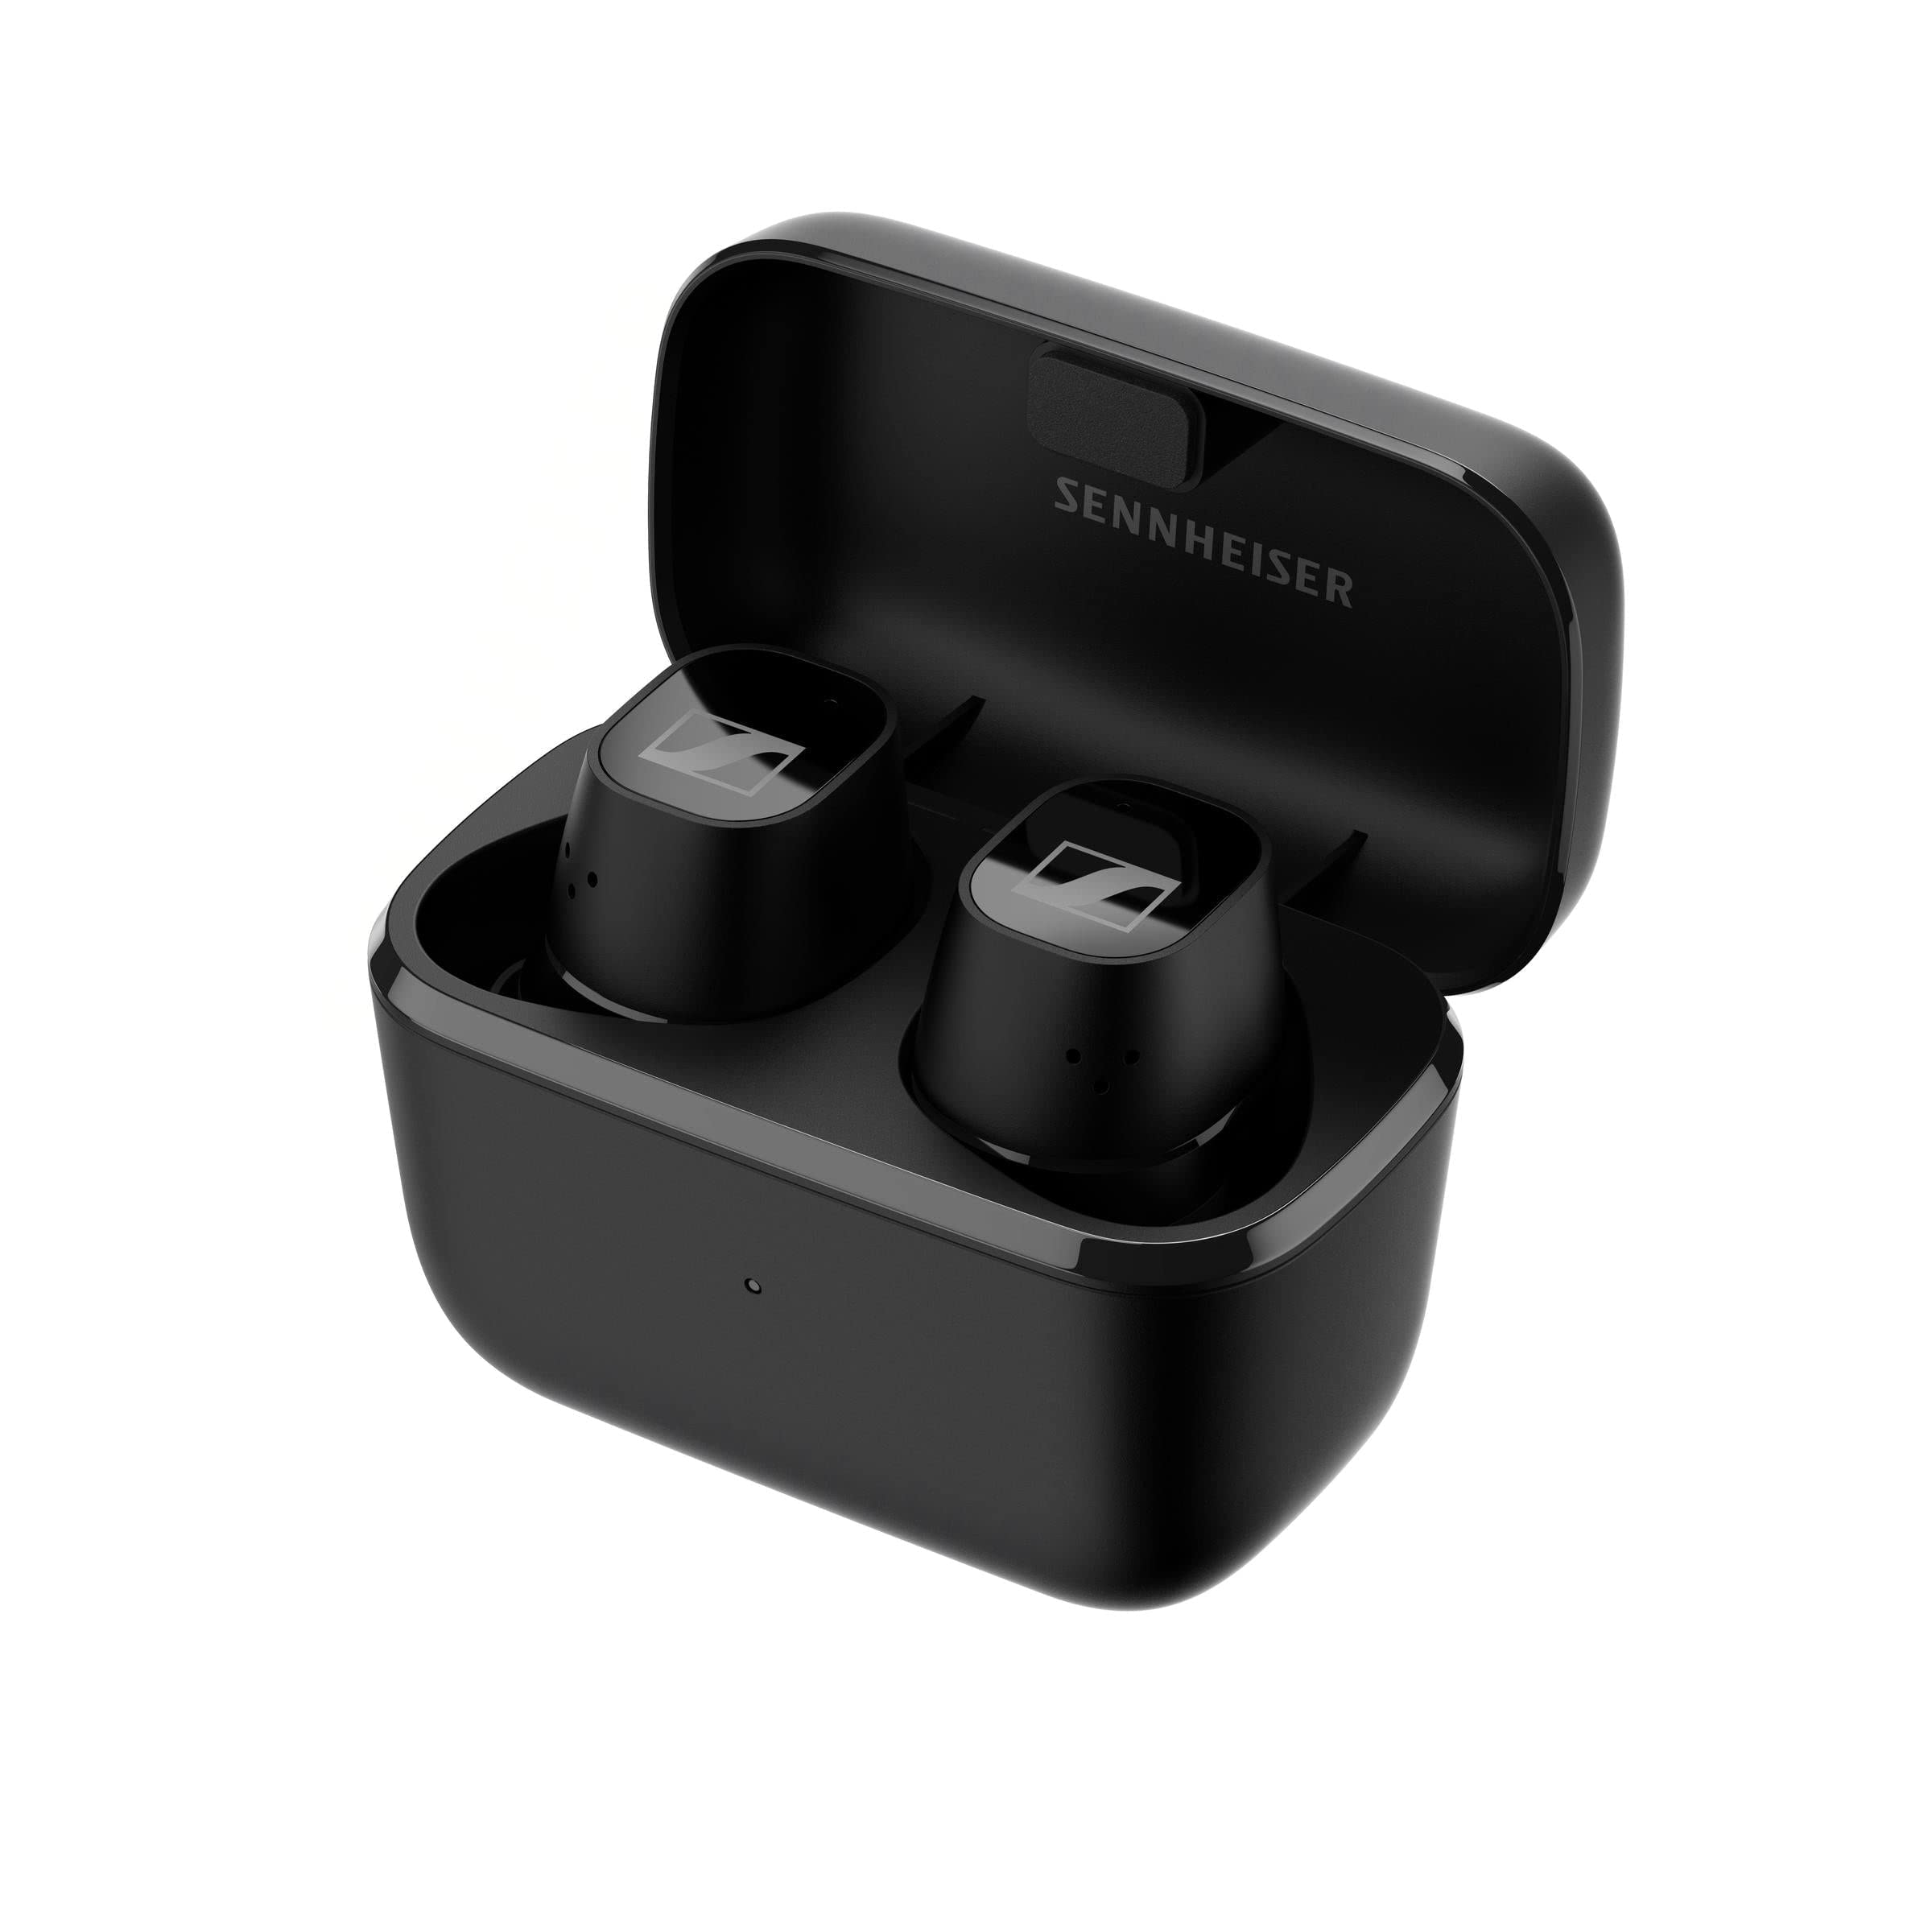 Sennheiser CX Plus True Wireless Earbuds - Bluetooth in-Ear Headphones for Music and Calls with Active Noise Cancellation  - Like New